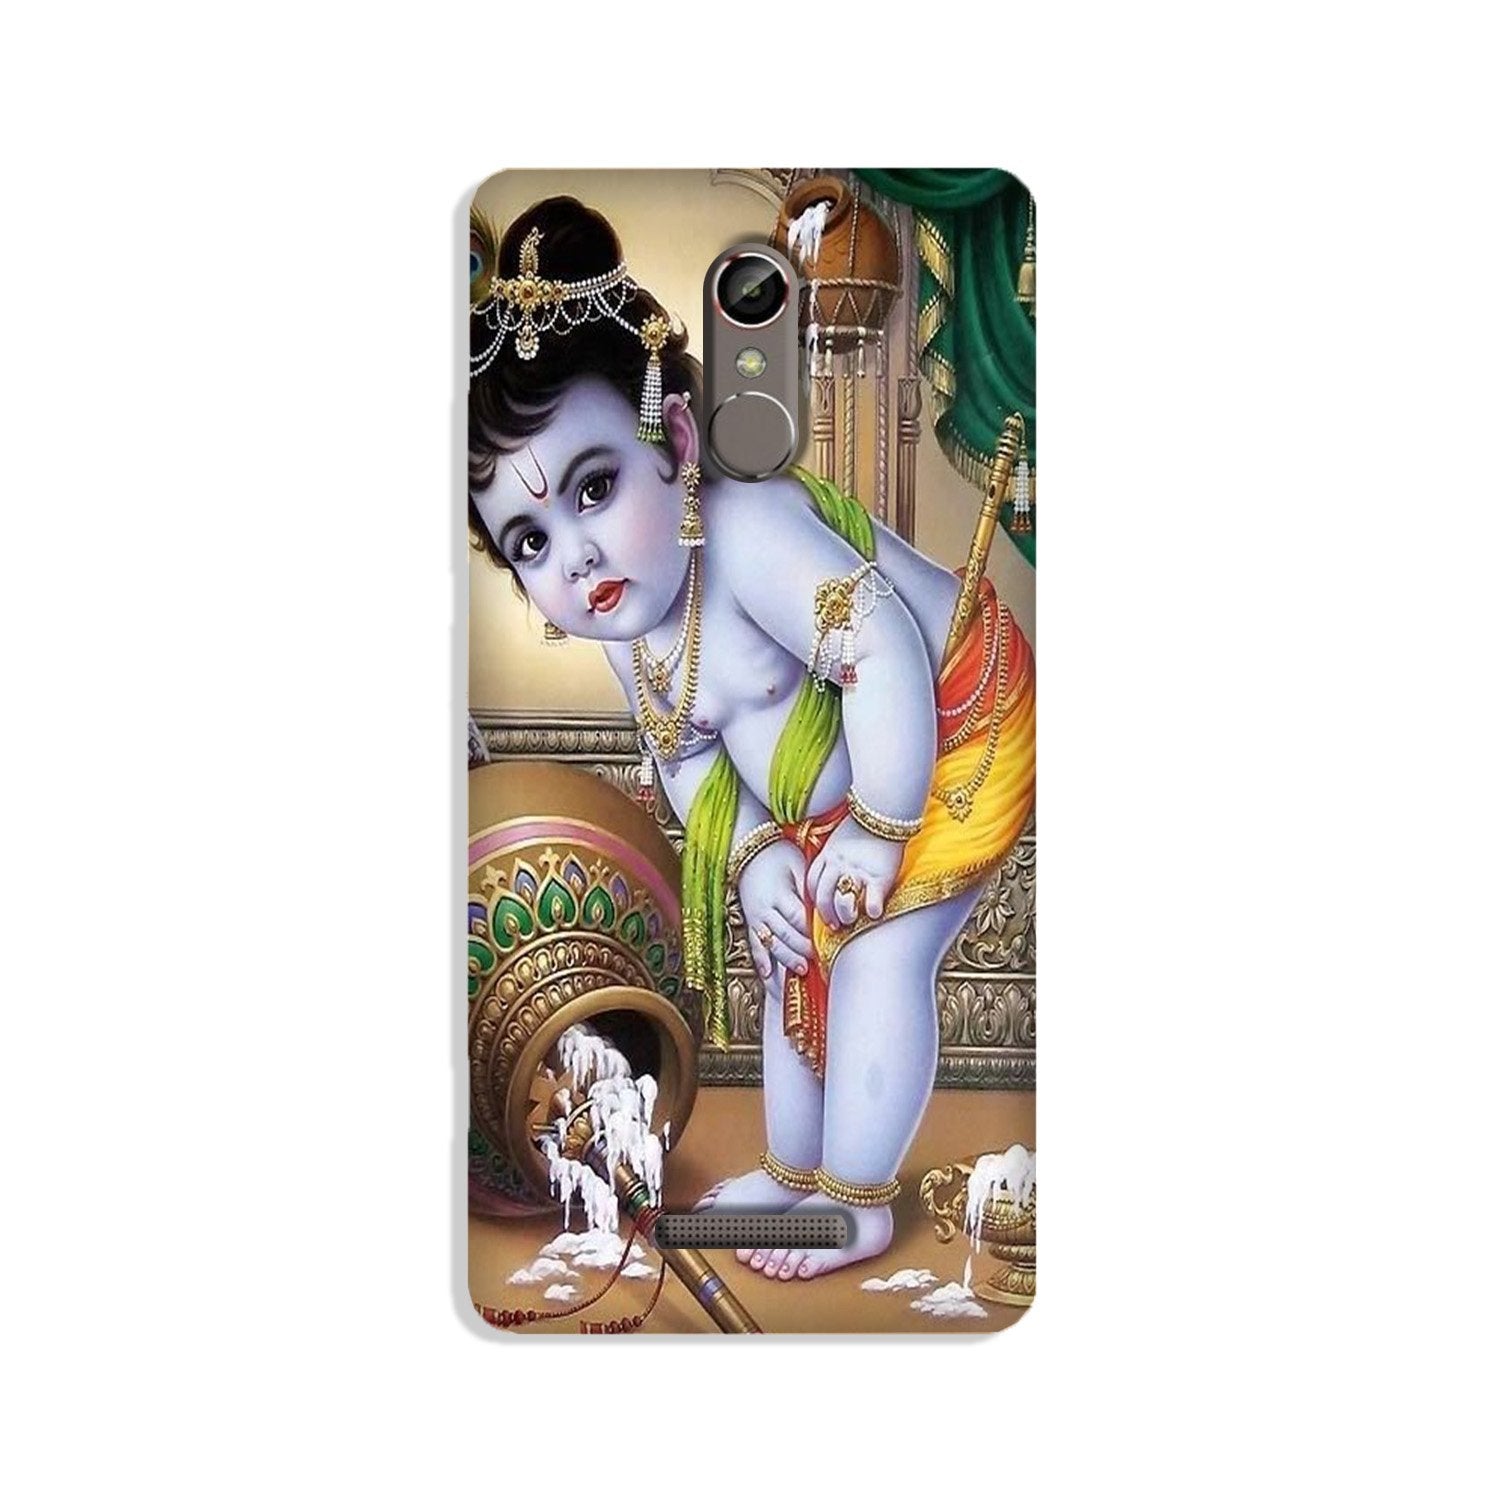 Bal Gopal2 Case for Gionee S6s